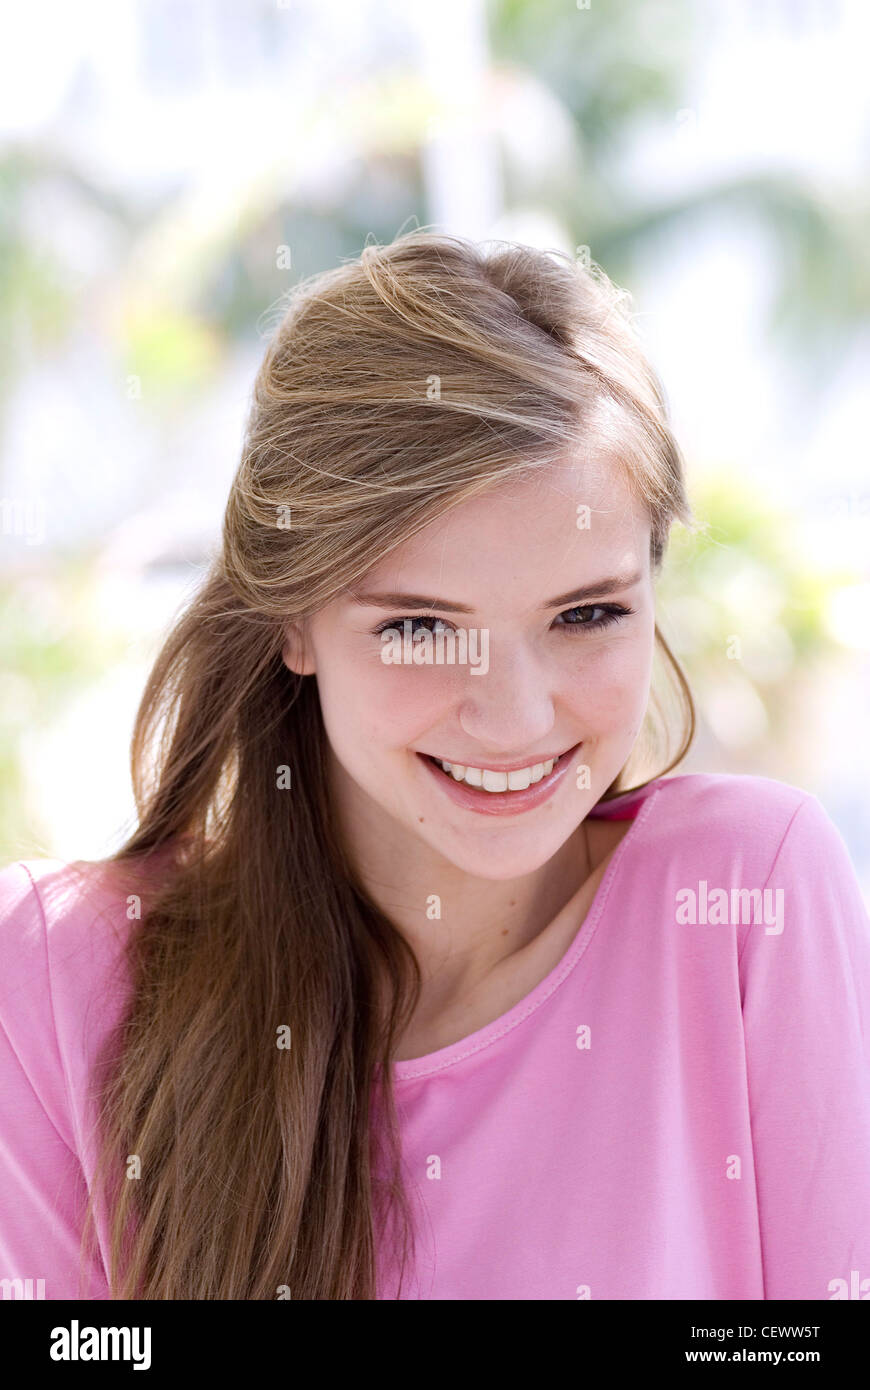 Female Long Straight Light Brown Hair Wearing Pink Round Neck